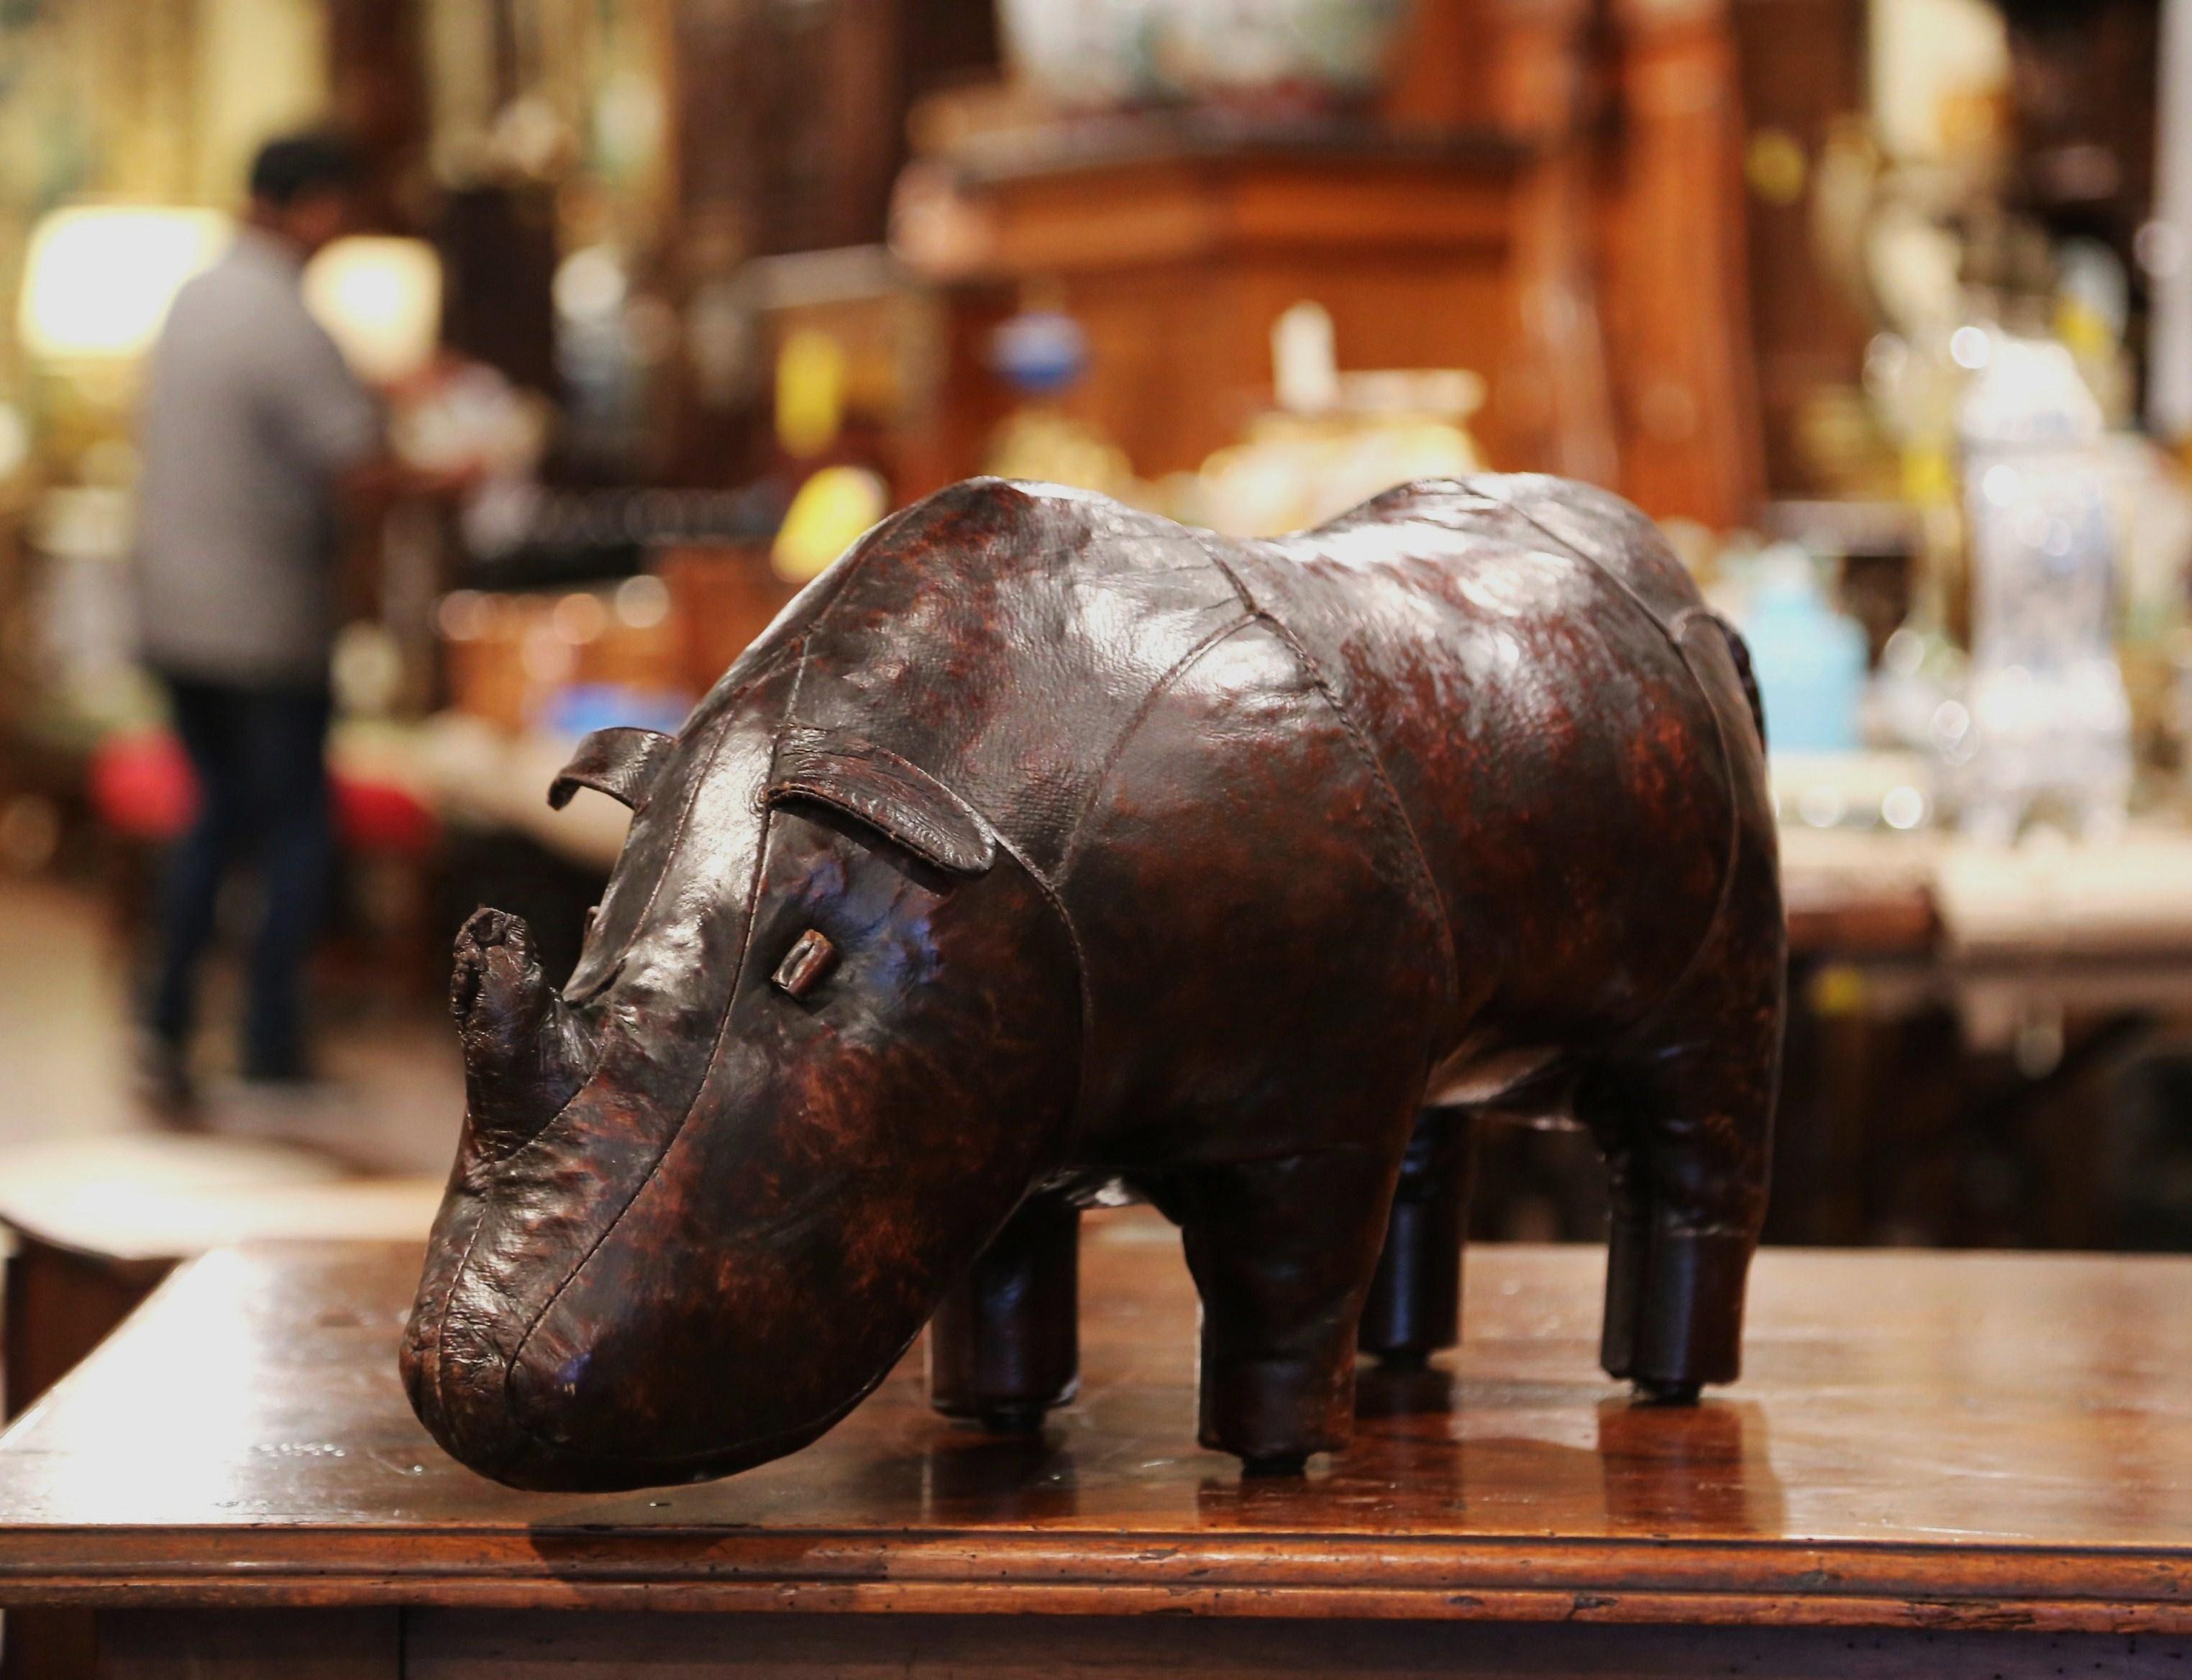 This beautiful, antique footrest was crafted in England, circa 1920. Shaped as a rhinoceros, the unique, freestanding, sculptural stool has been recovered with its original patinated brown leather. The Big Five sculpture is in excellent condition